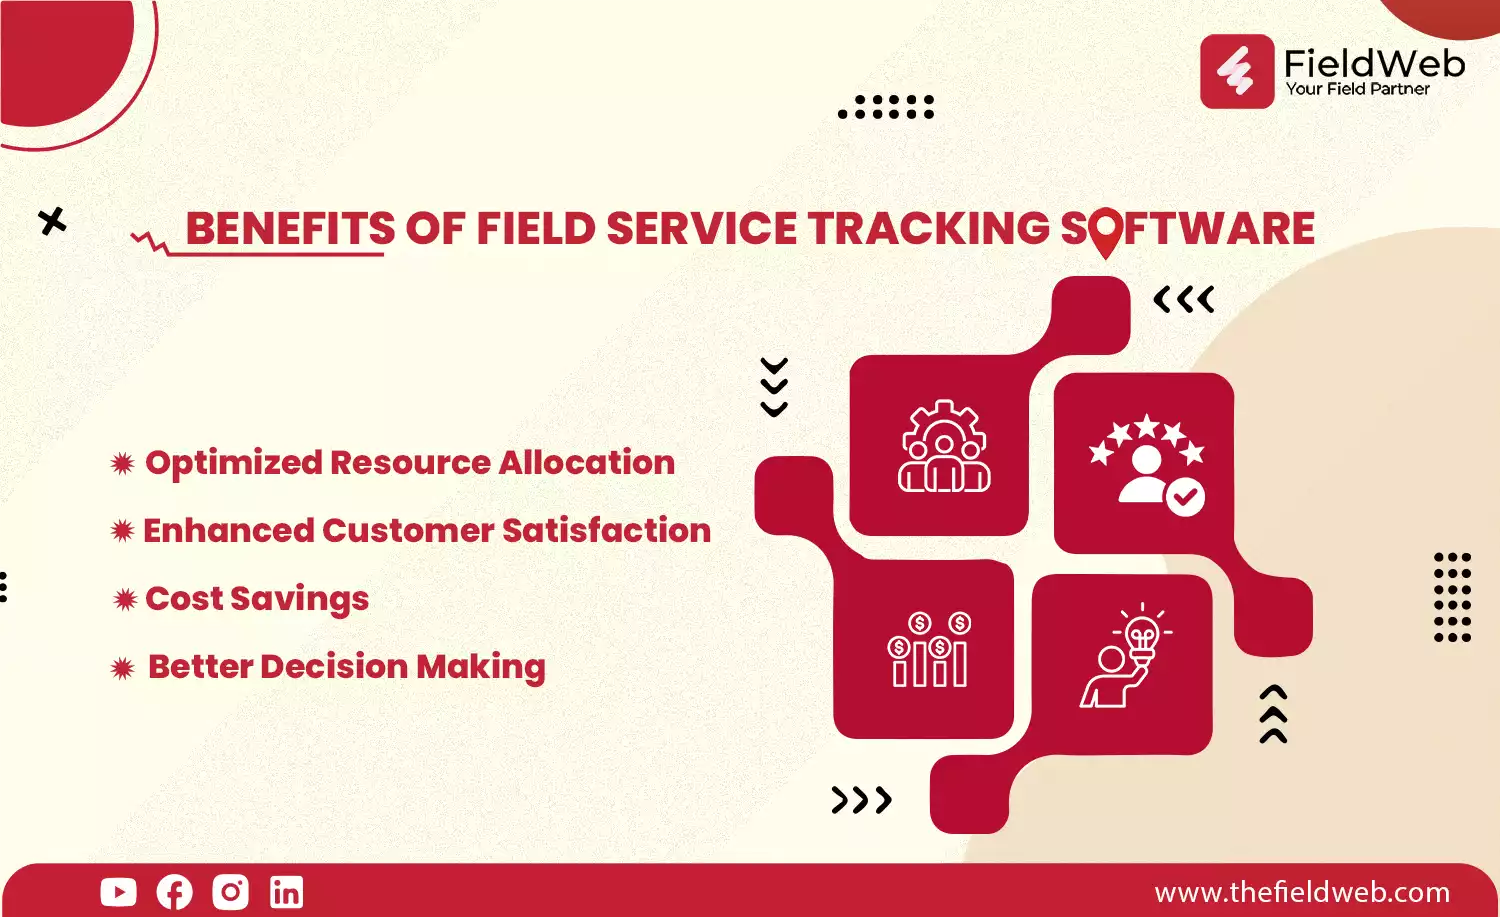 image is displaying 4 Benefits of field service tracking software